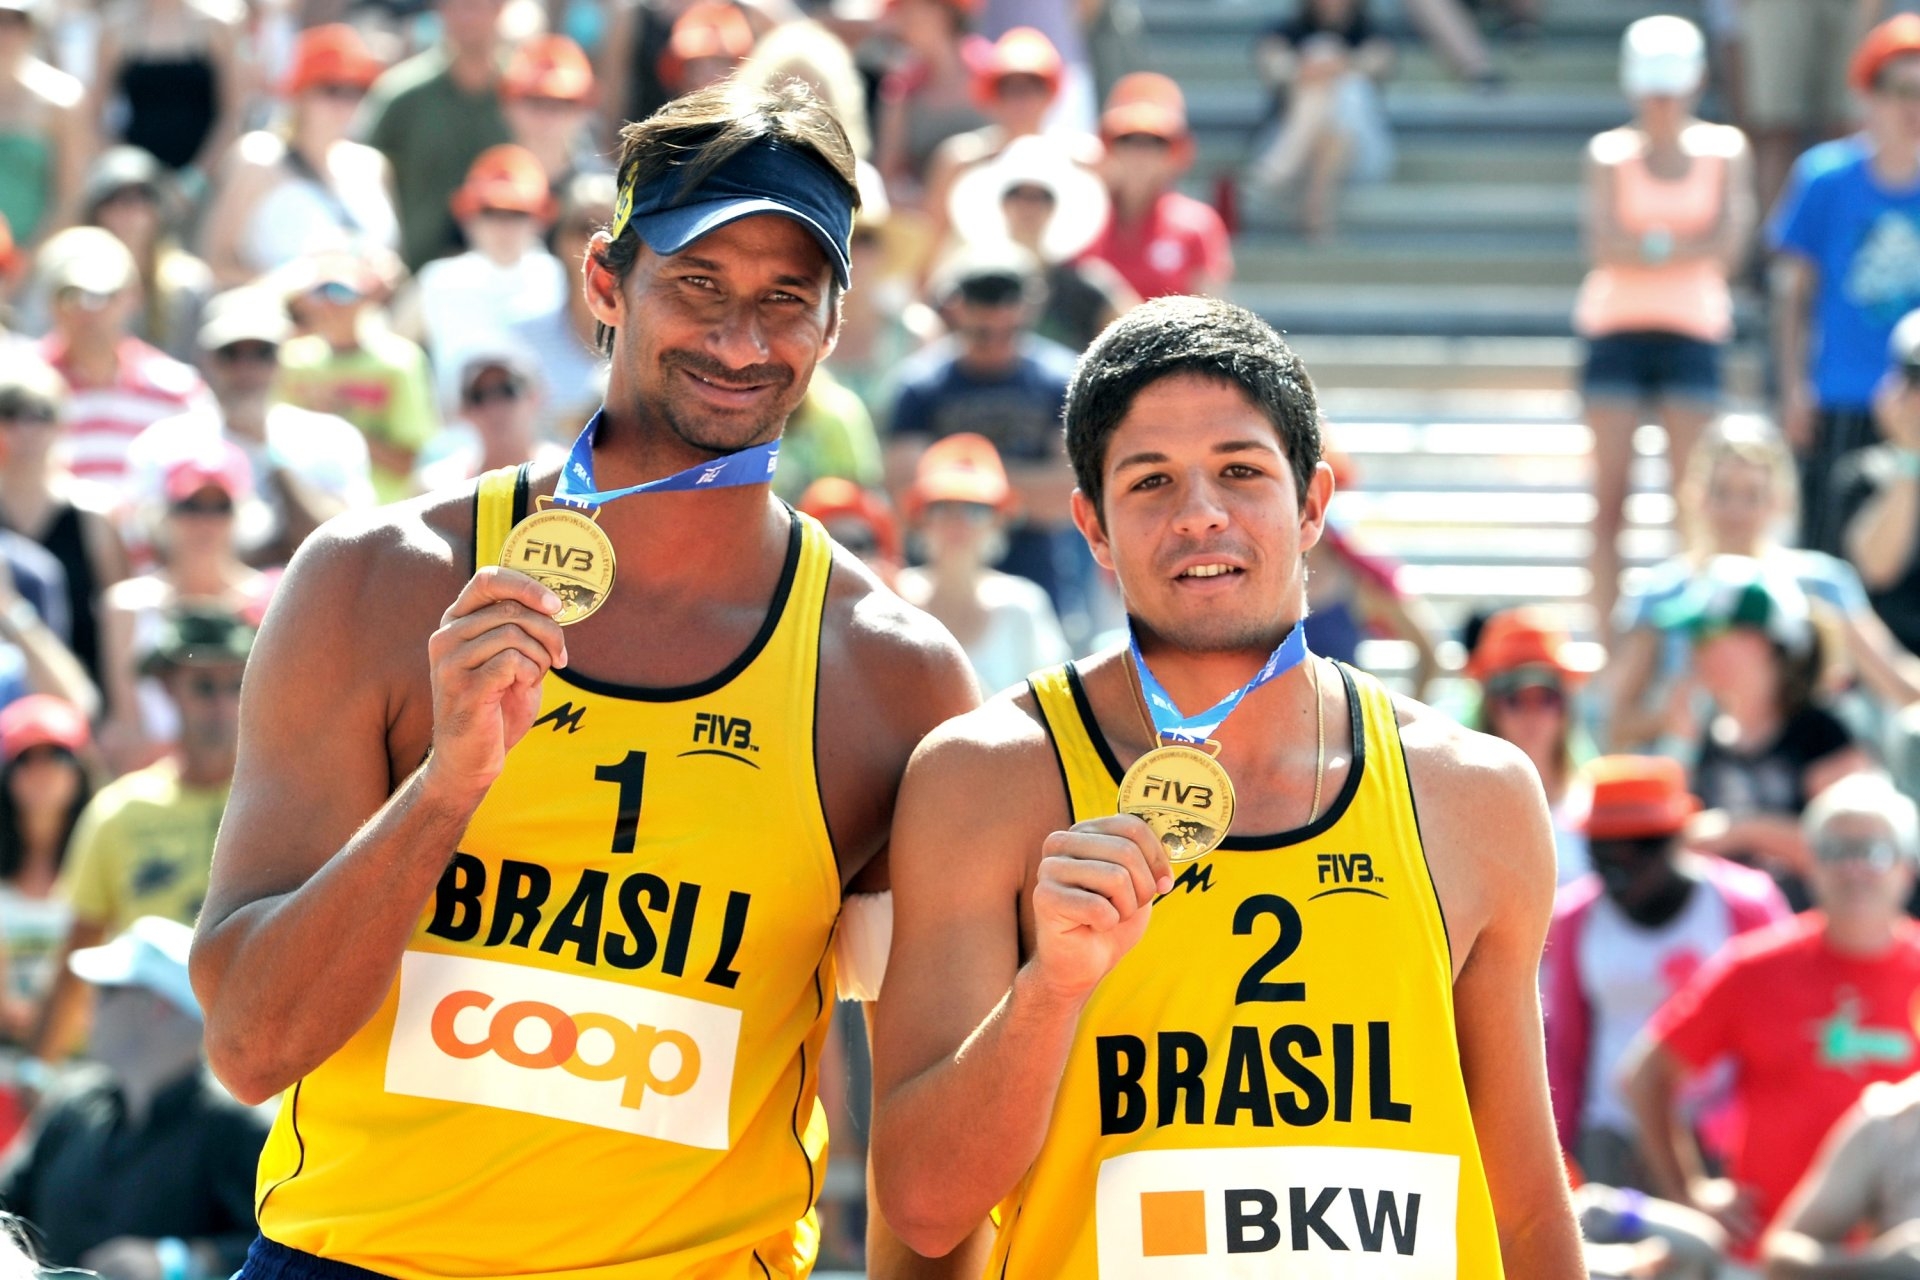 Ricardo and Álvaro topped the podium in Gstaad back in 2013